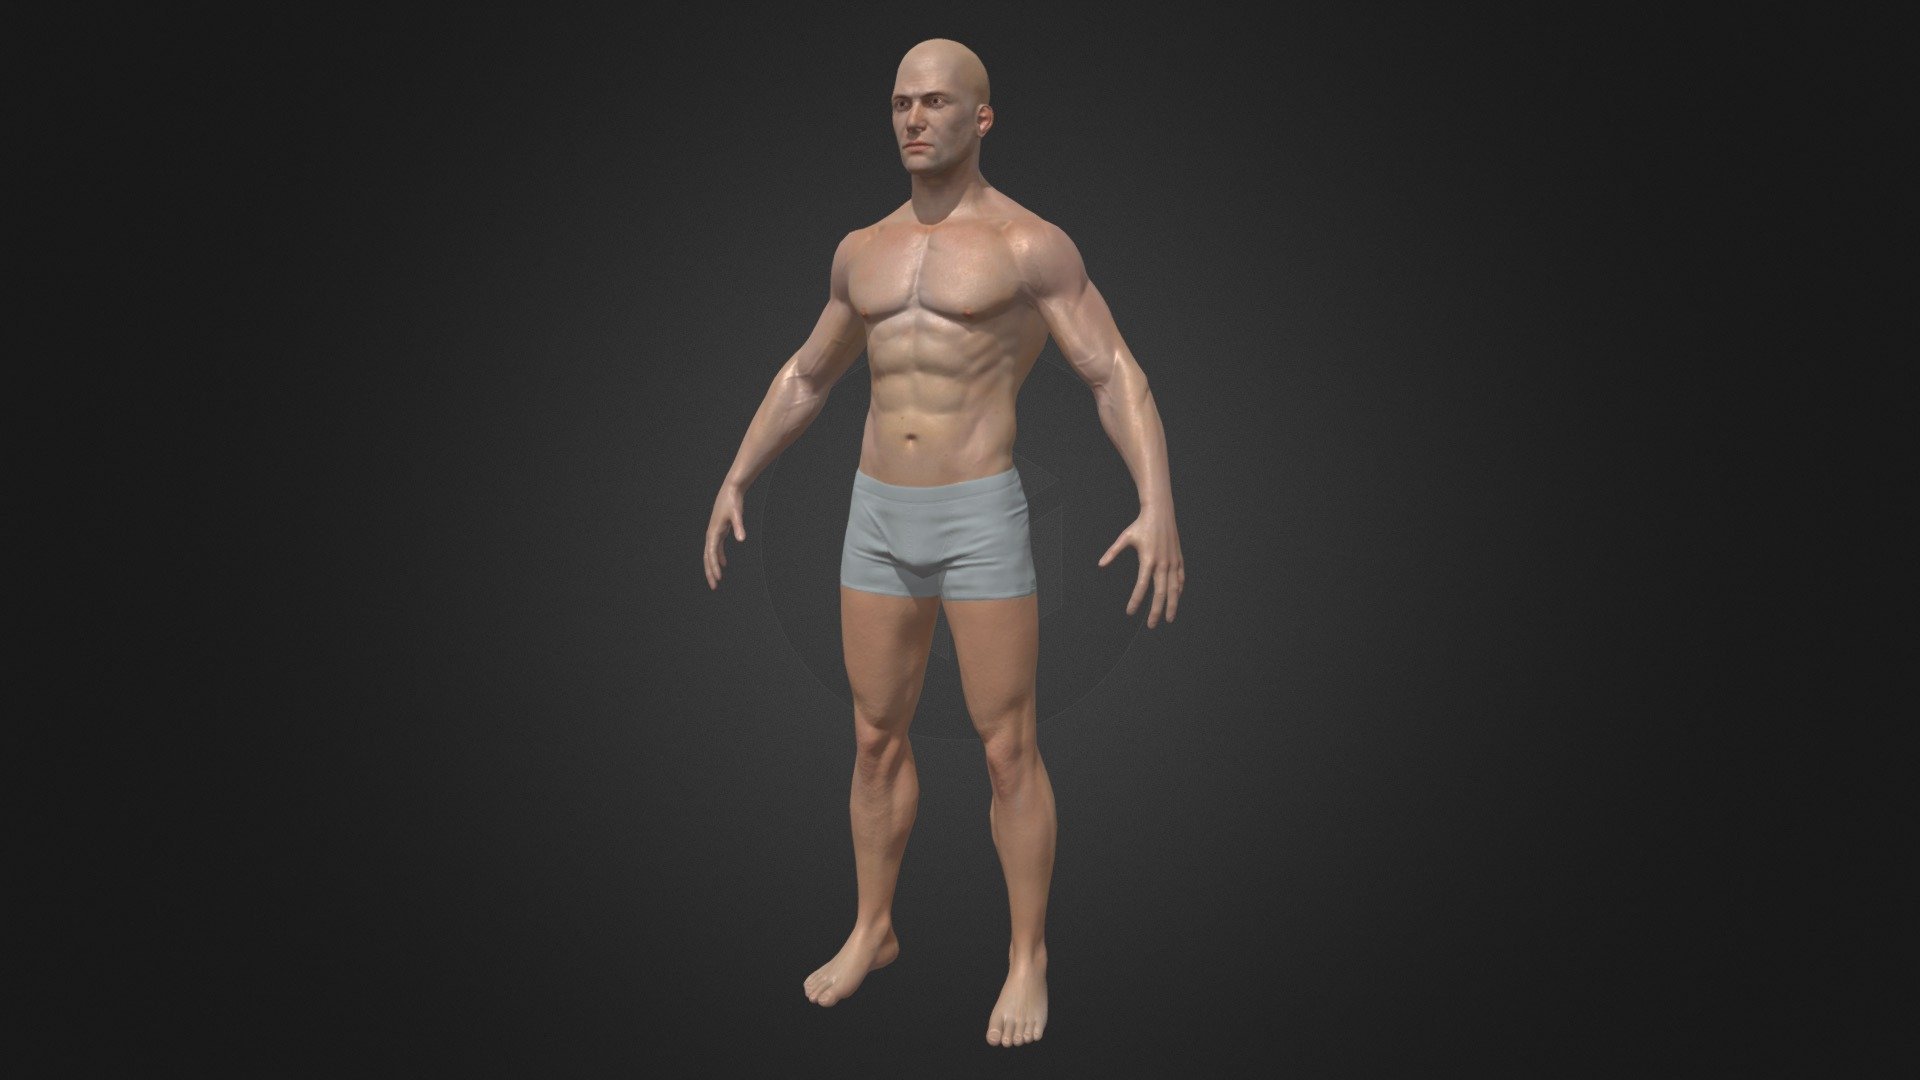 Men Body
This product is an optimized model with excellent texturing for realistic and faster rendering.

The model has an optimized low poly mesh with the greatest possible number of simplifications that do not affect photo-realism but can help to simplify it, thus lightening your scene and allowing for using this model in real-time 3d applications.

Real-world accurate model. Correctly scale modeled to represent precisely like in the real world.

In this product, all objects are ERROR-FREE. All LEGAL Geometry. Subdivisions are not required for this product.

Perfect for Architectural, Product visualization, Game Engine, and VR (Virtual Reality) No Plugin Needed.

Format Type




3ds Max 2017 (with physical PBR Shader)

FBX

OBJ

3DS

You might need to re-assign textures map to model in your relevant software - Men Body - Buy Royalty Free 3D model by luxe3dworld 3d model